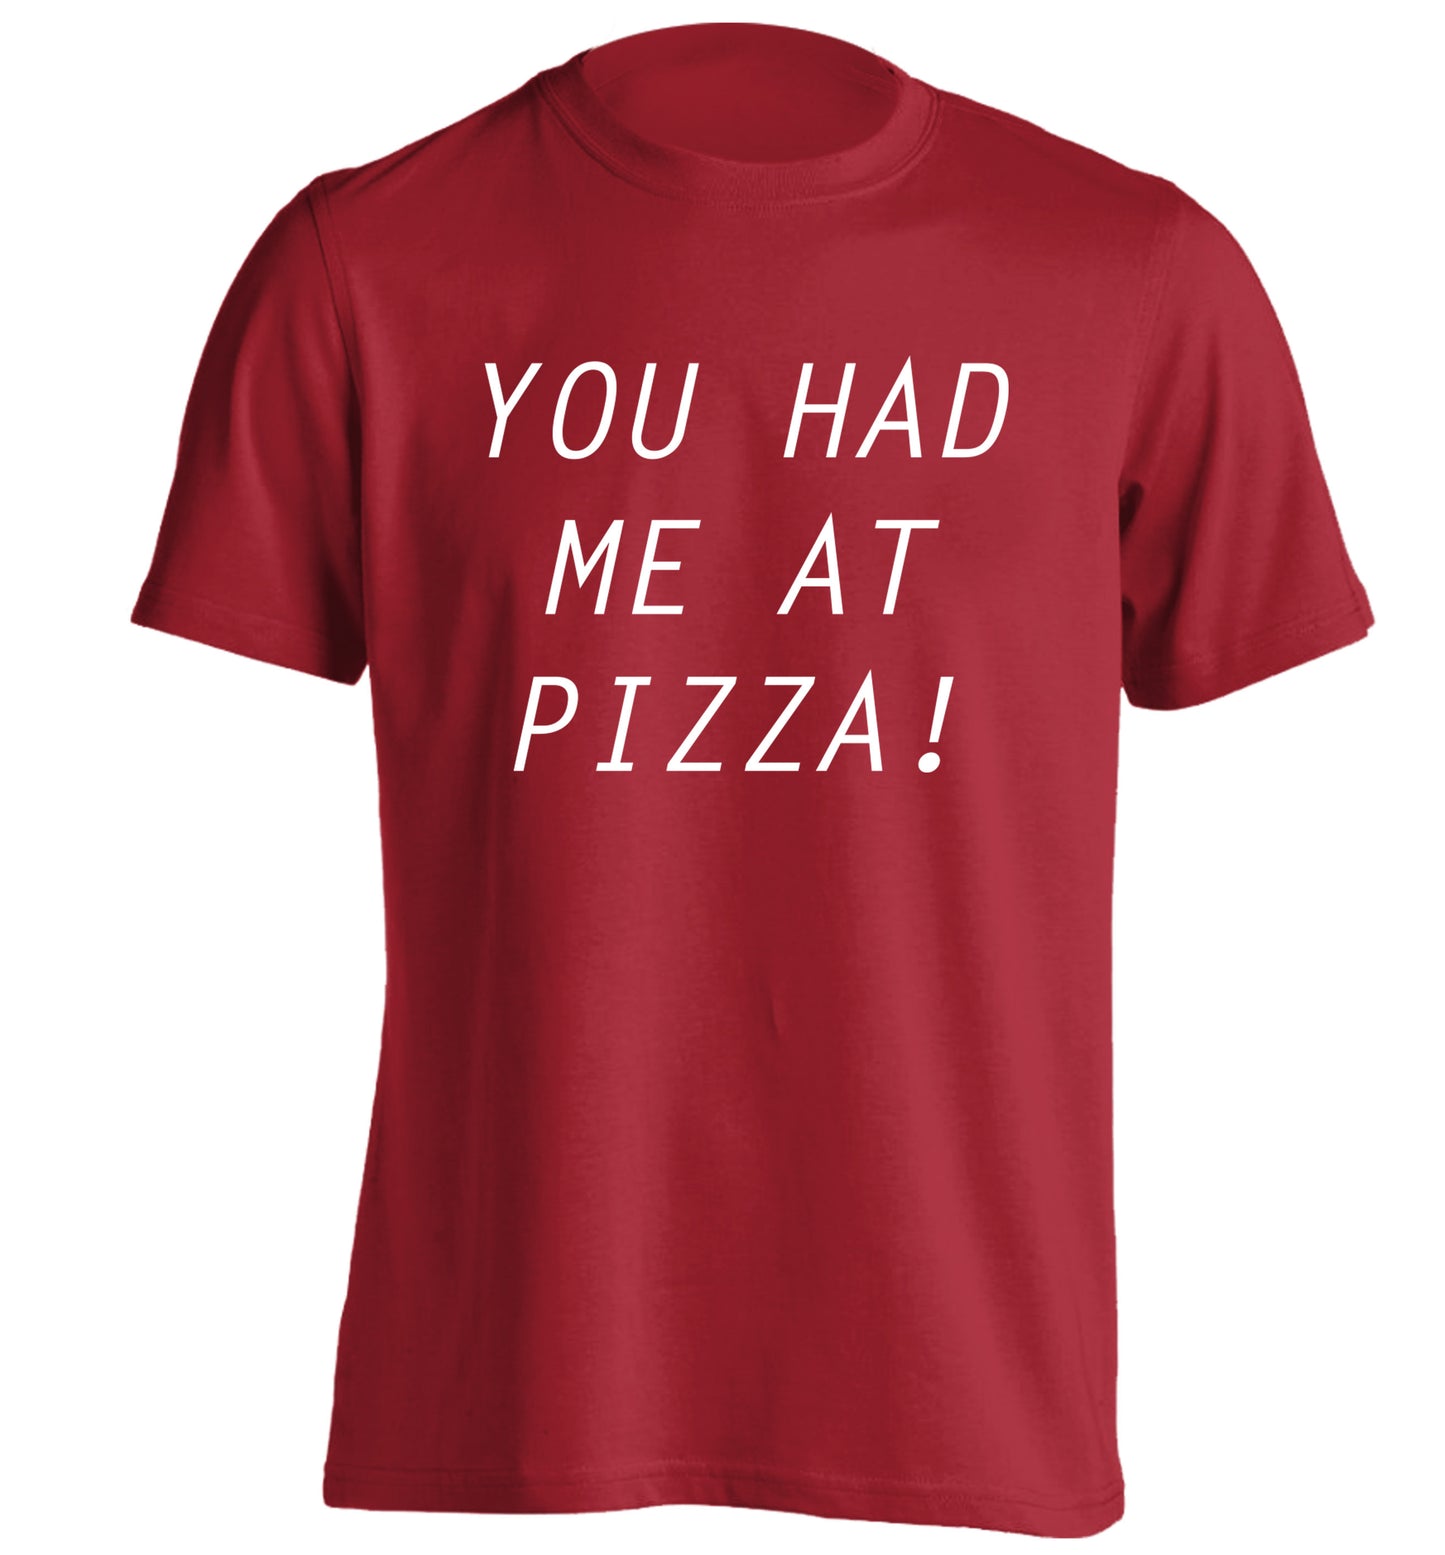 You had me at pizza adults unisex red Tshirt 2XL